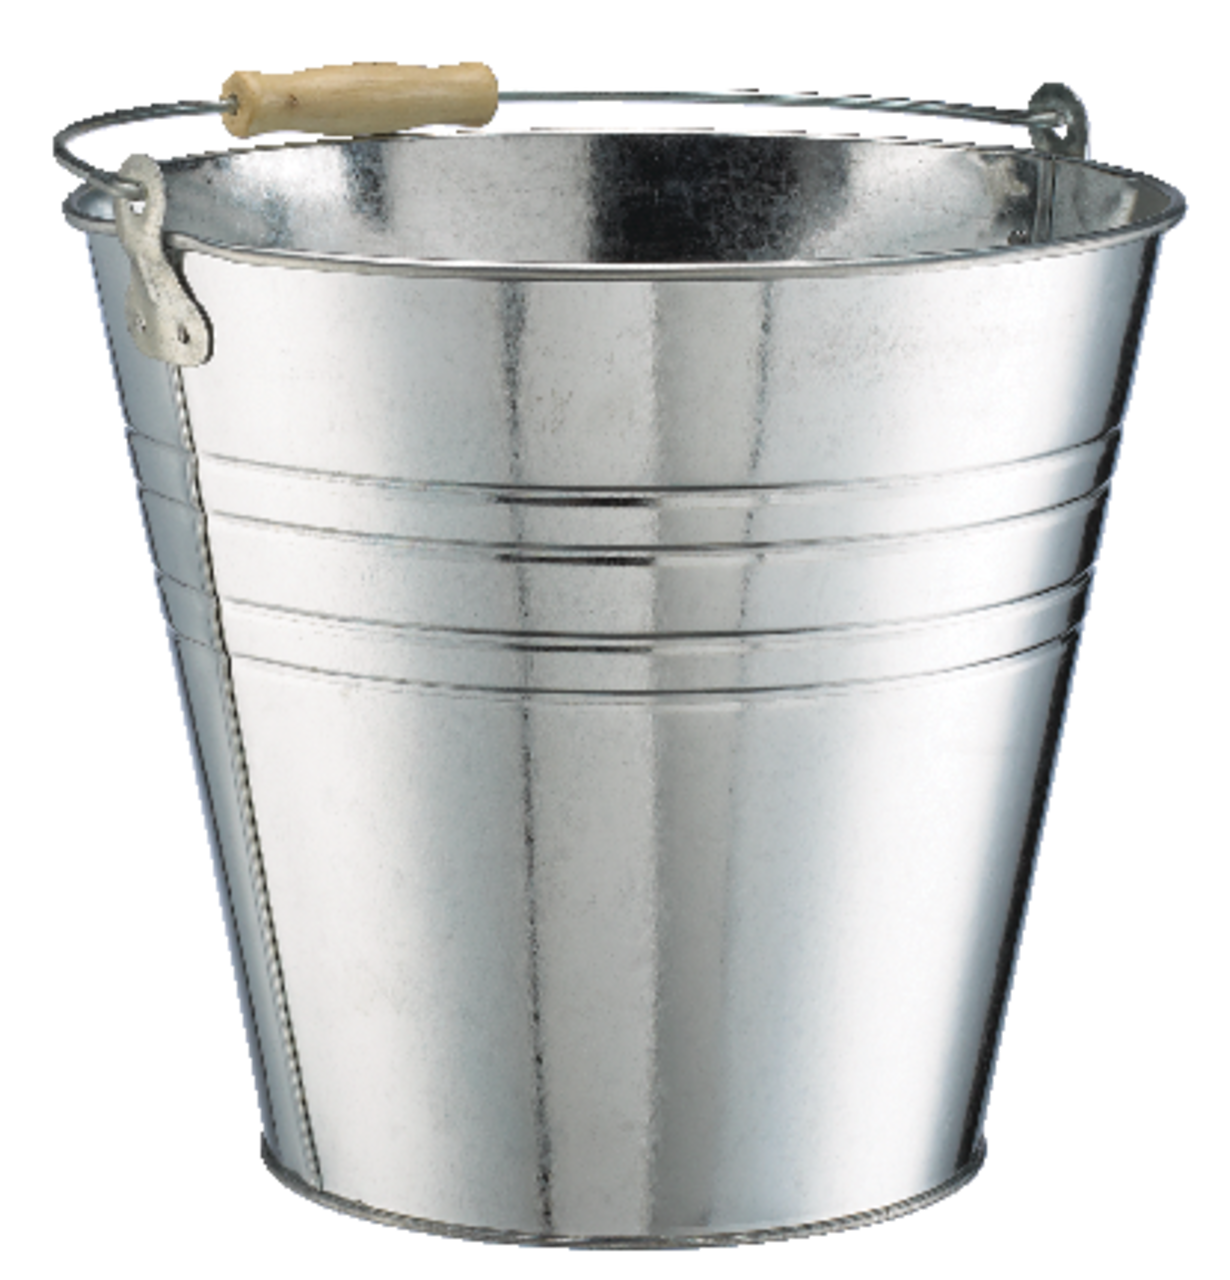 https://media-www.canadiantire.ca/product/living/cleaning/household-cleaning-tools/0429630/galvanized-15l-pail-954194a6-6327-4612-bcff-f5c685243ee7.png?imdensity=1&imwidth=640&impolicy=mZoom